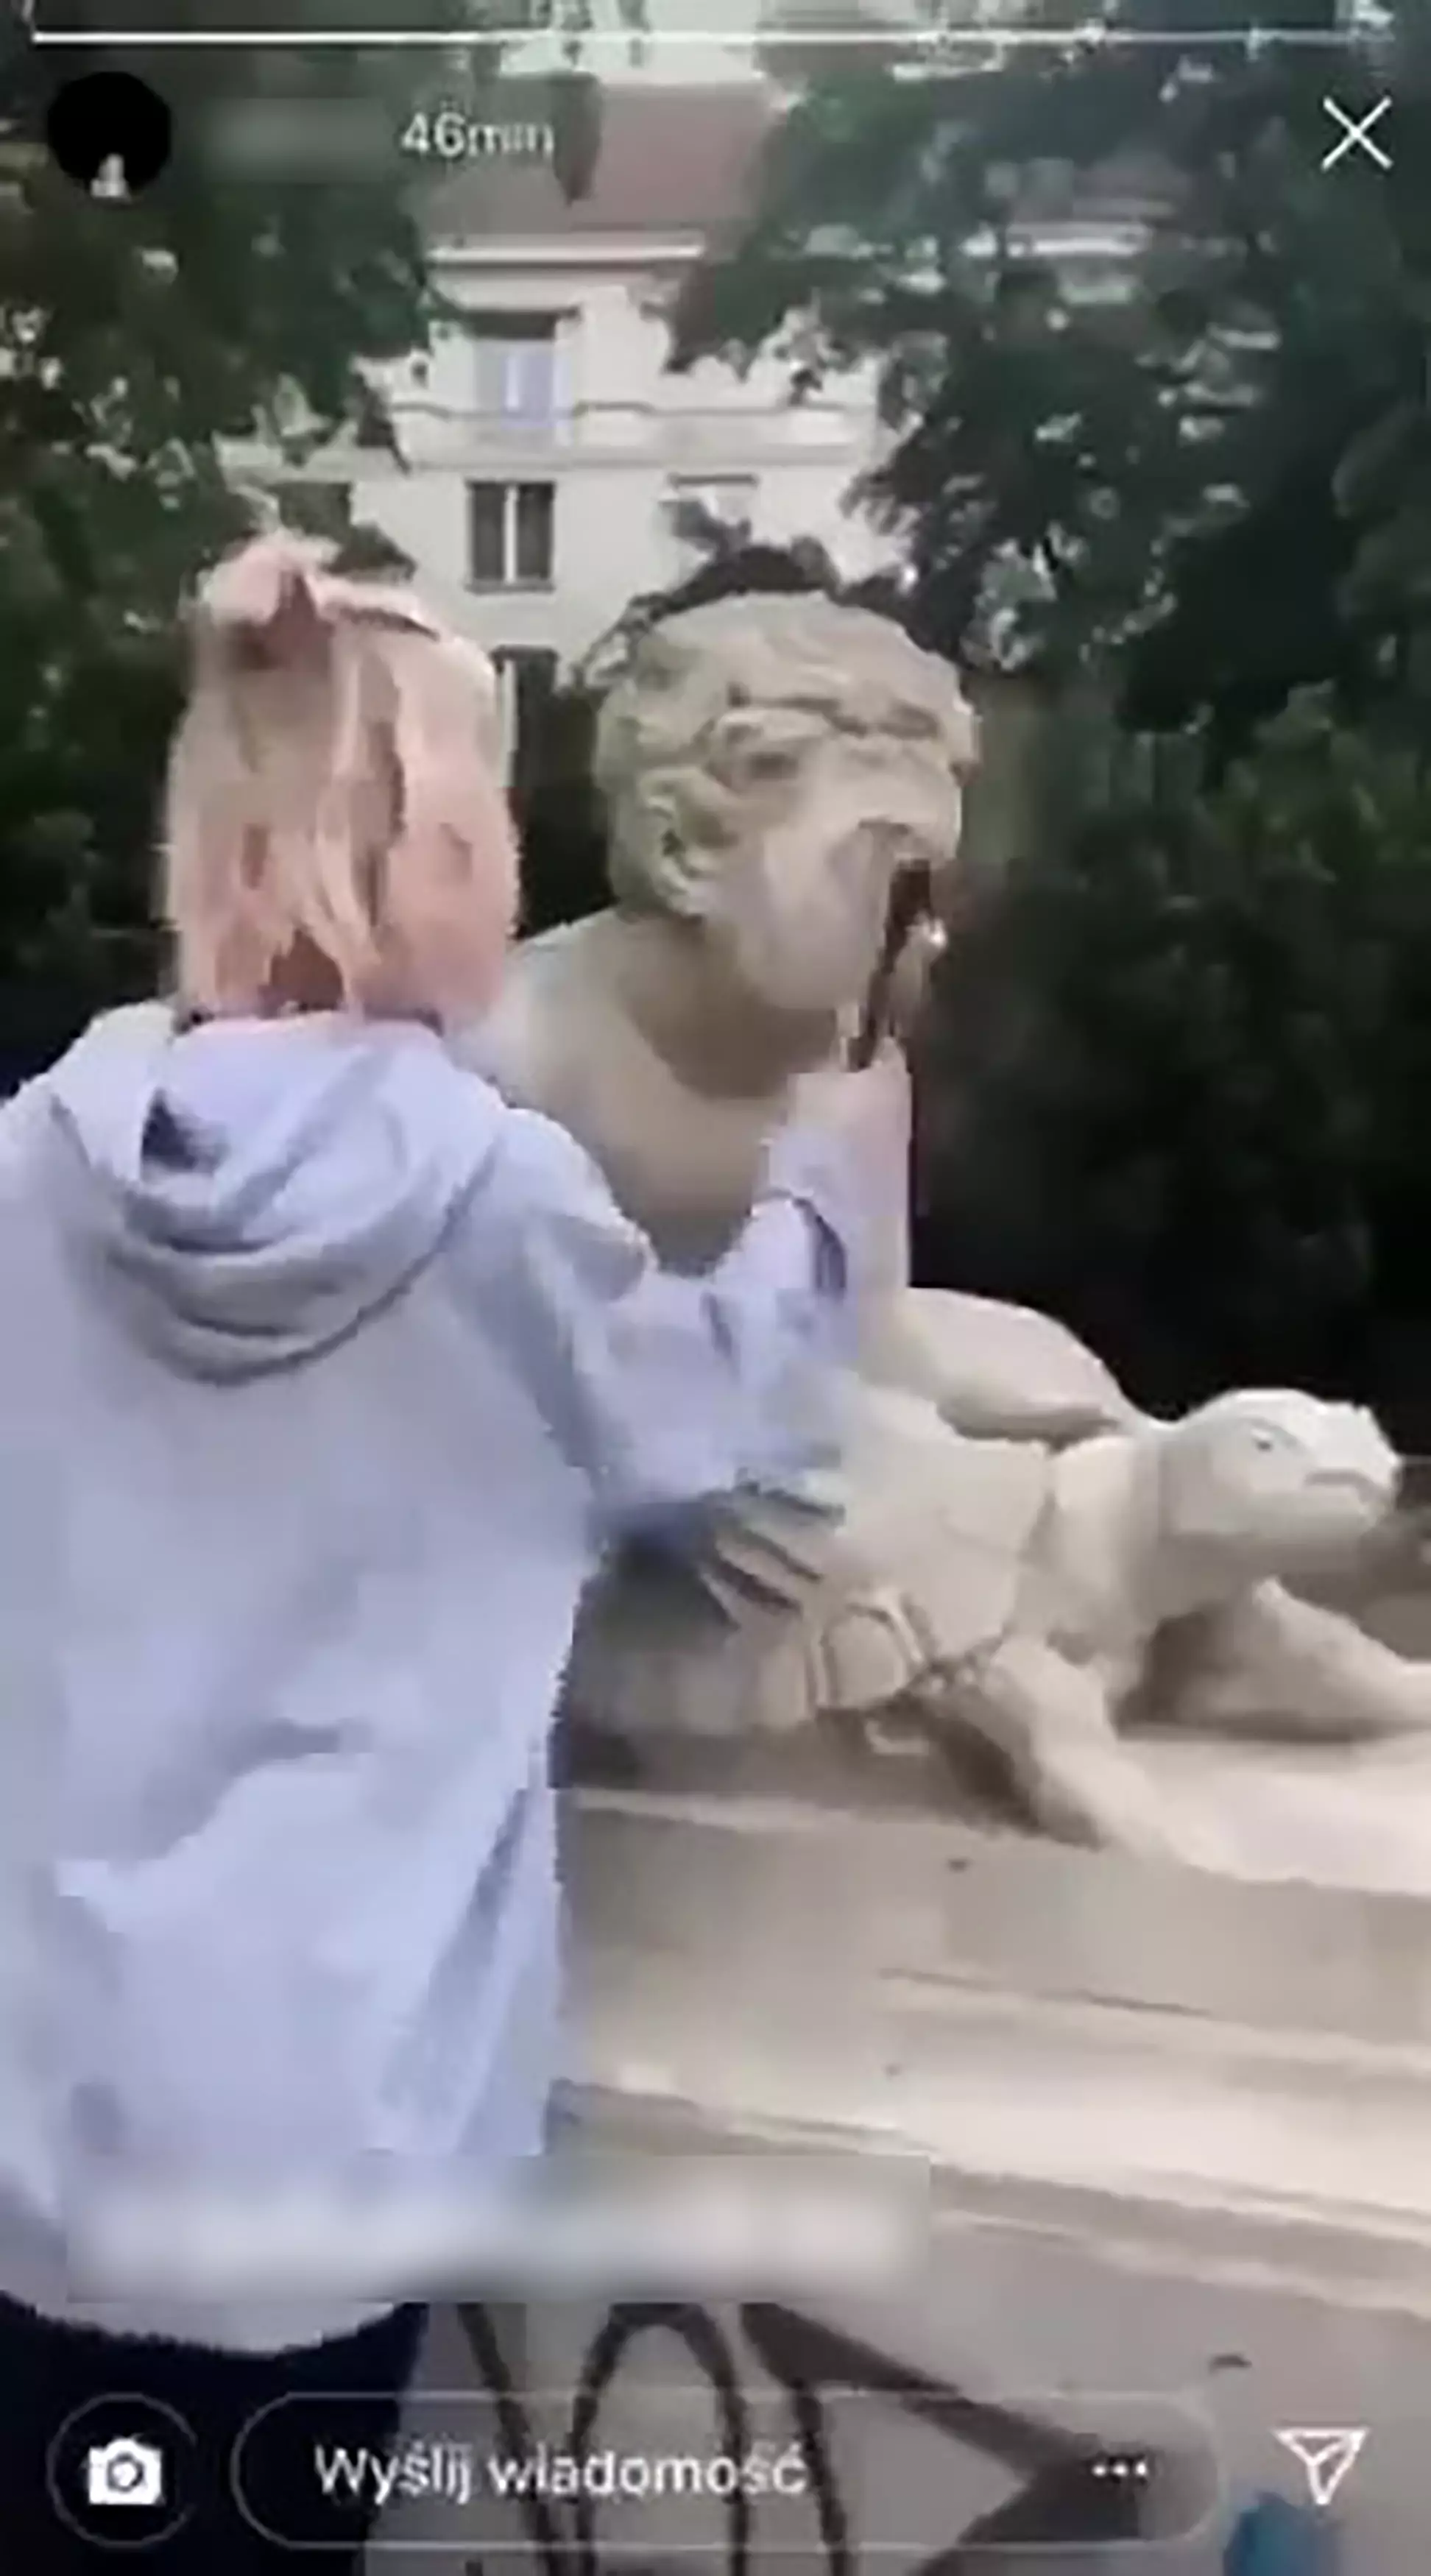 The Instagram model used a hammer to smash the nose off the statue.